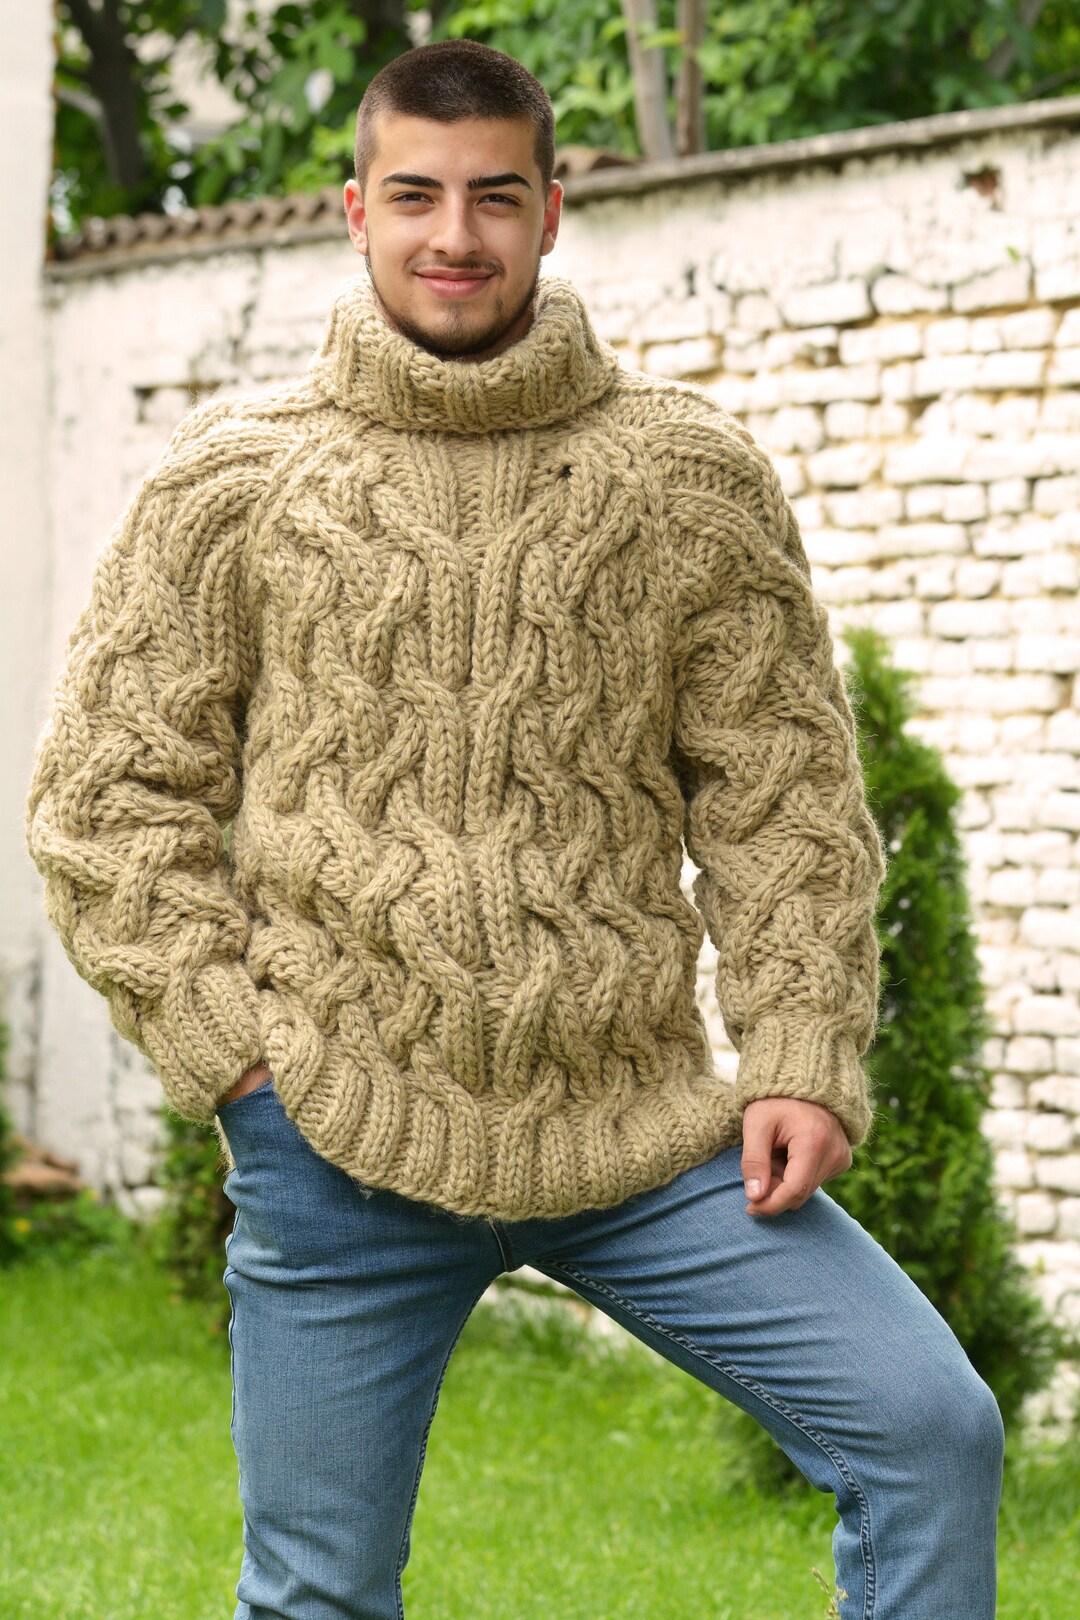 Thick Cable Hand Knit 100% WOOL Turtleneck Sweater Light Beige Fuzzy ...